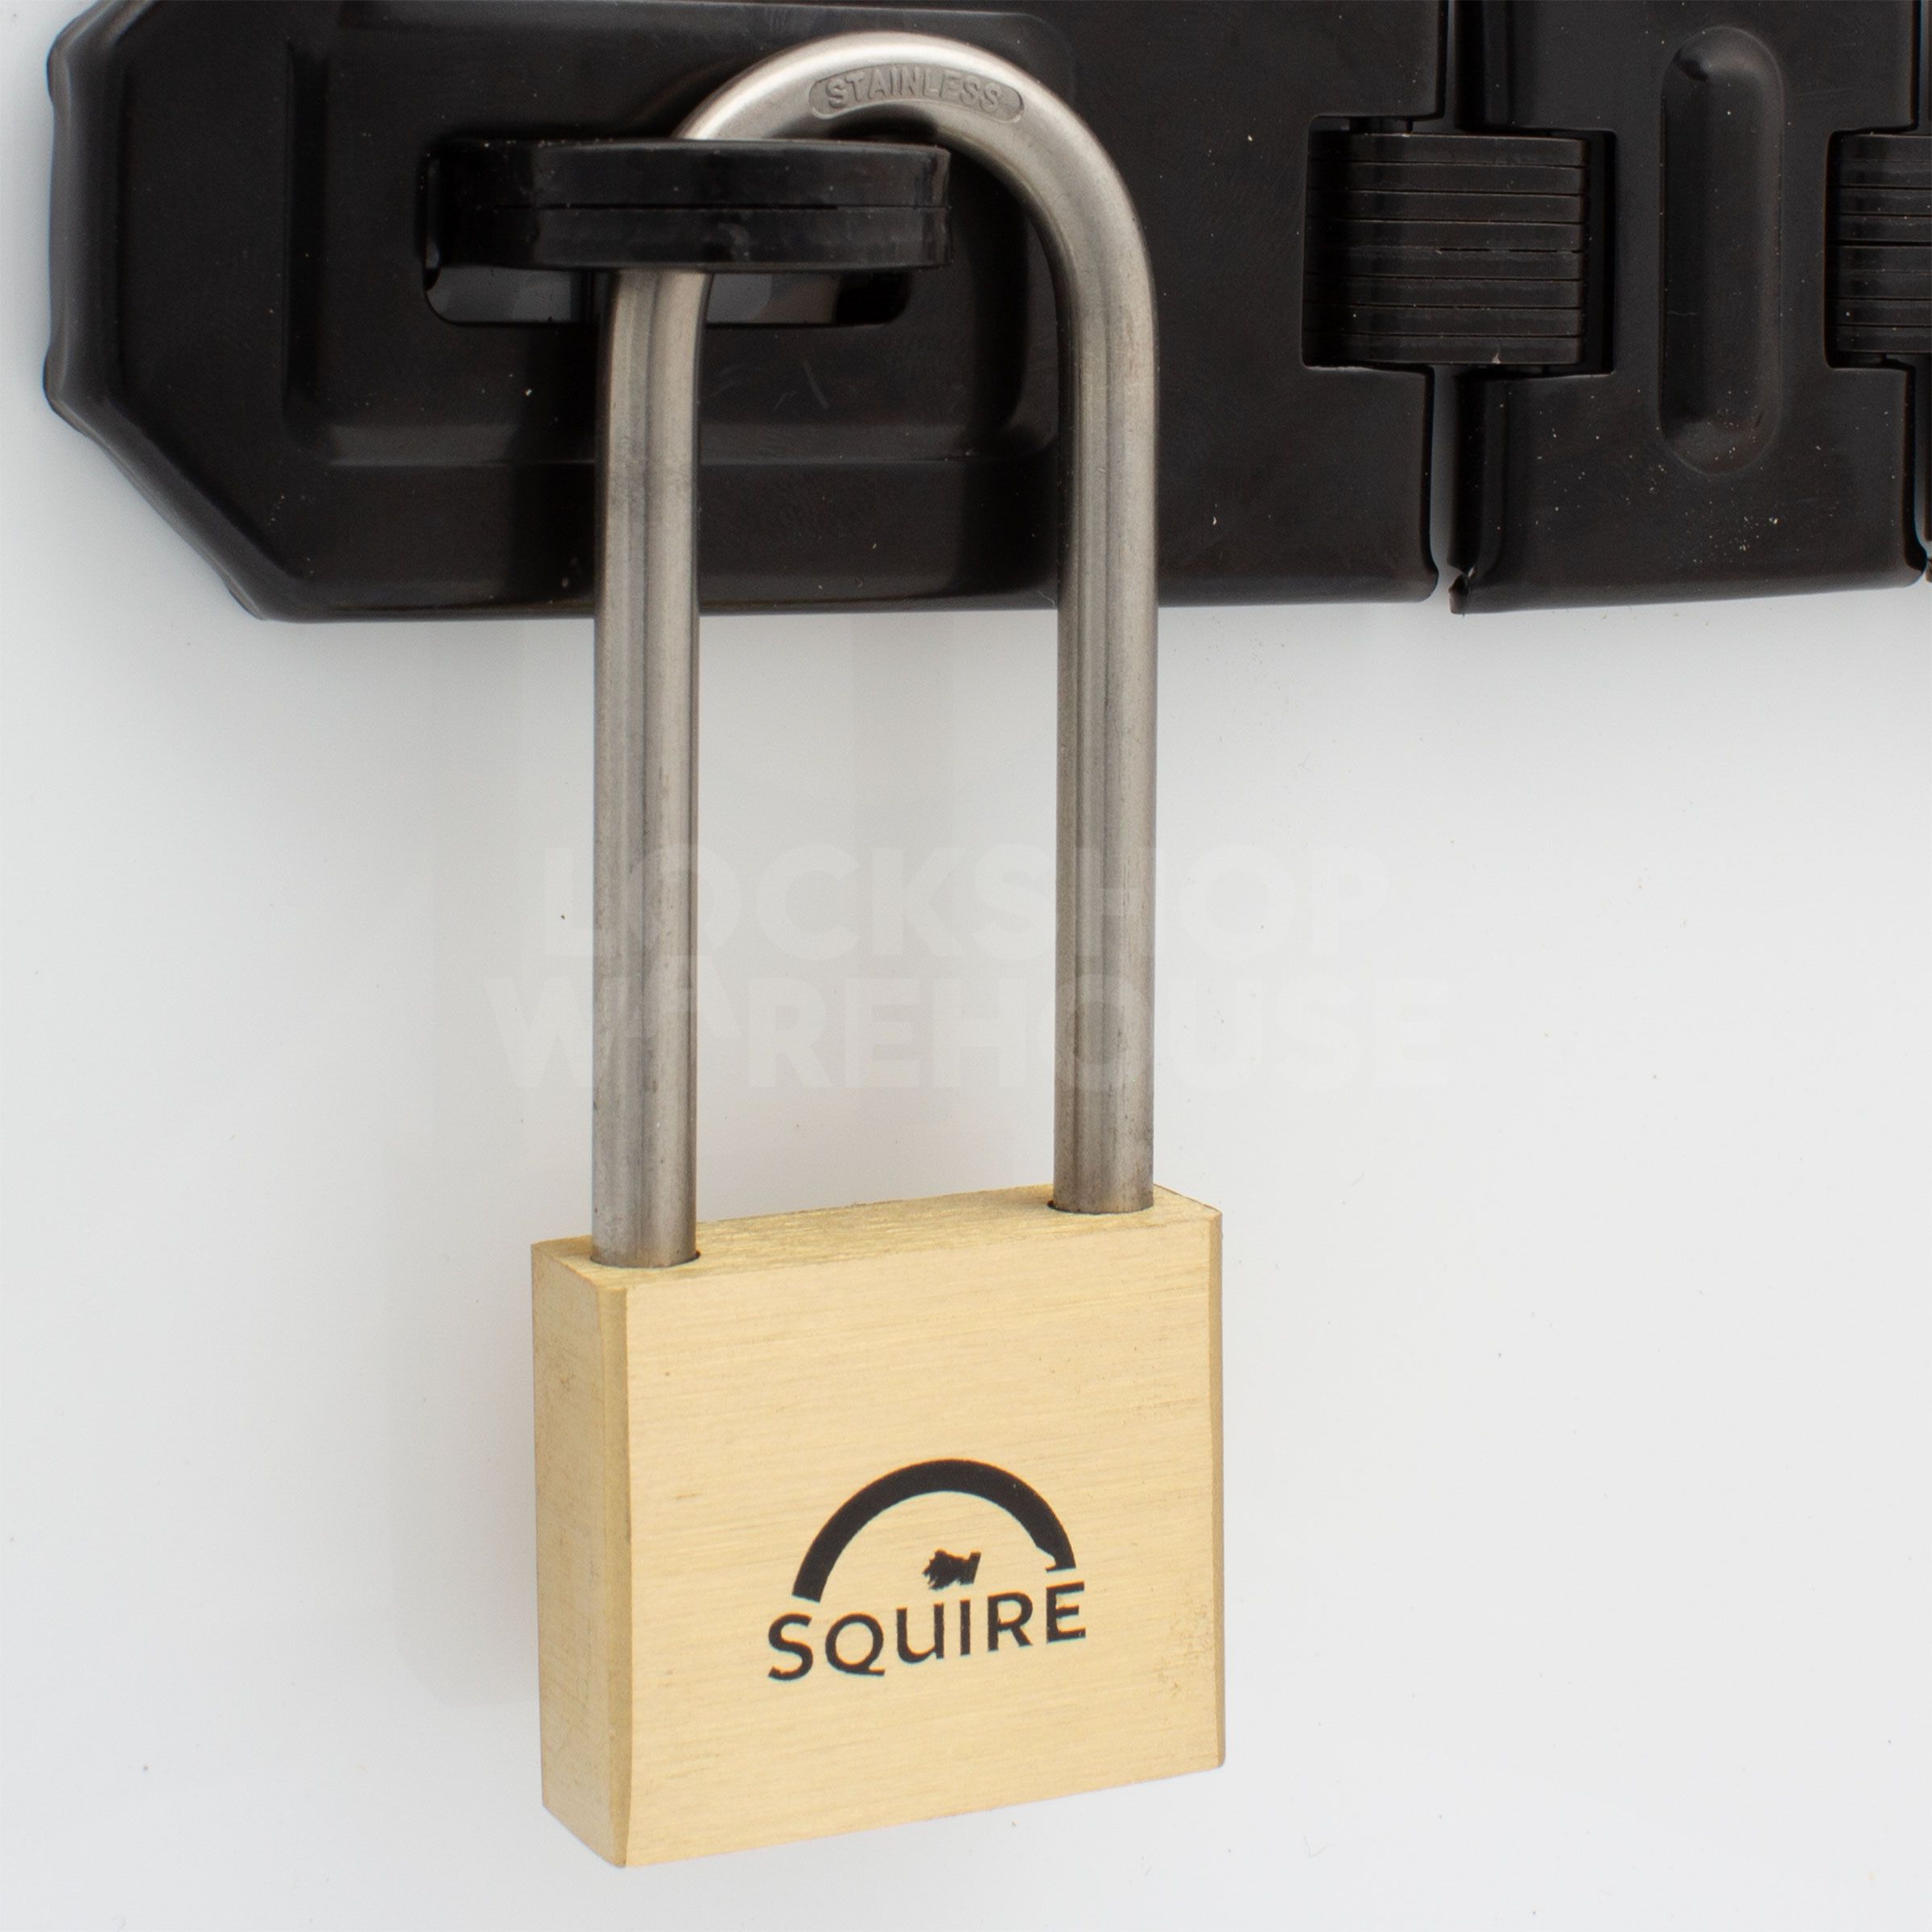 Squire LN4S MARINE - 40mm - Brass Padlock - 64mm Long Stainless Steel Shackle